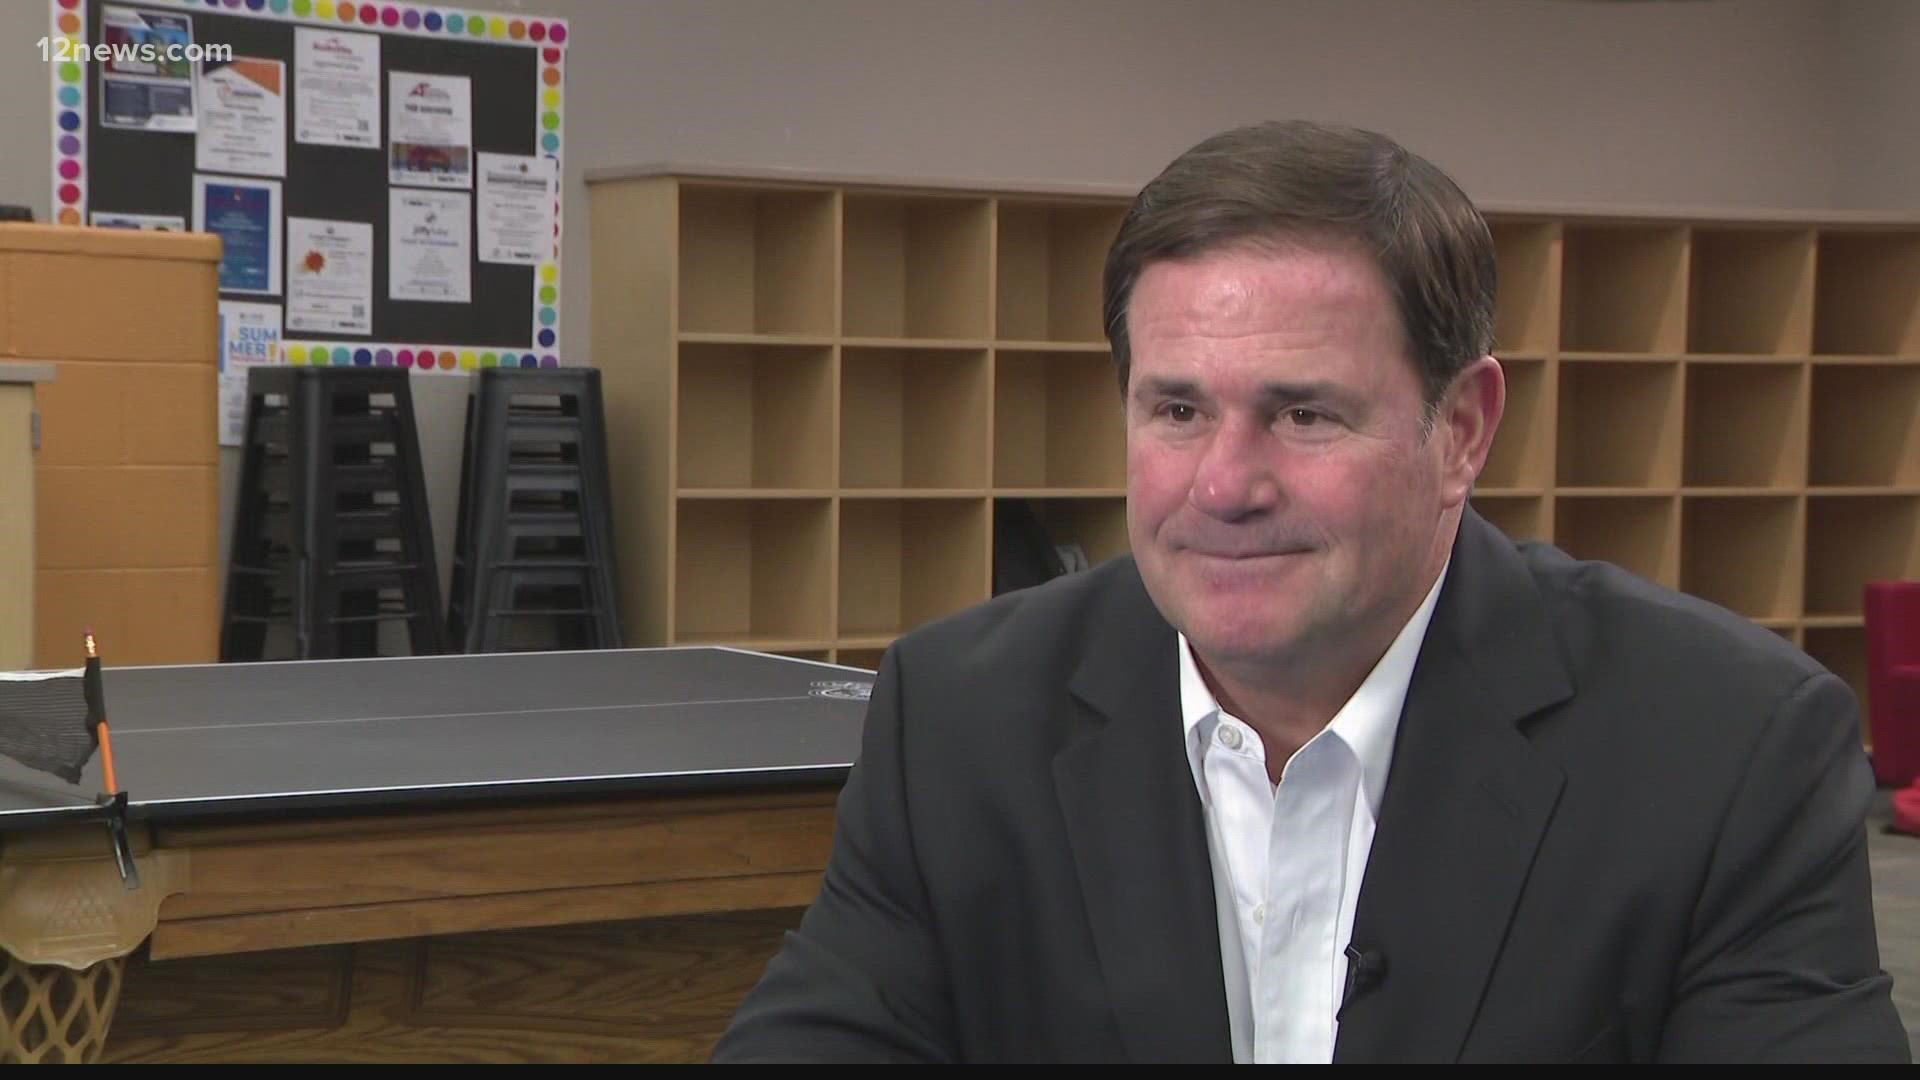 In an exclusive interview, Governor Doug Ducey addressed bills dealing with abortion and transgender rights. He reacts to the bills passed.